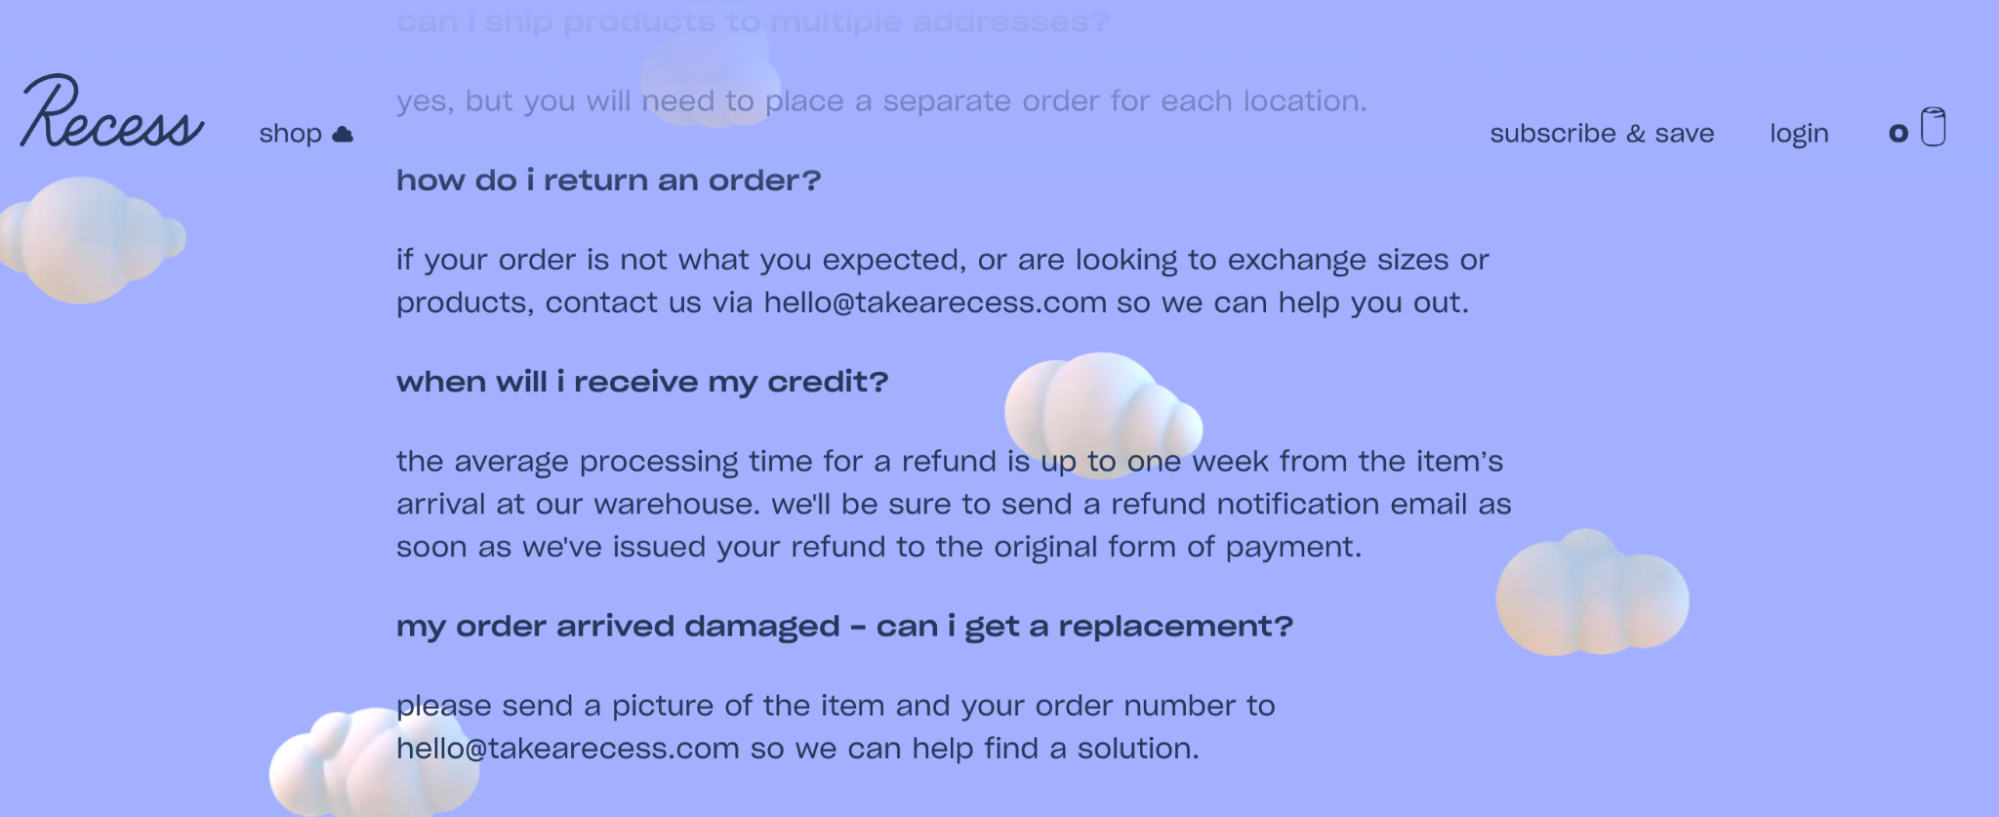 Recess’s returns policy page details the returns process and includes information on damaged orders.